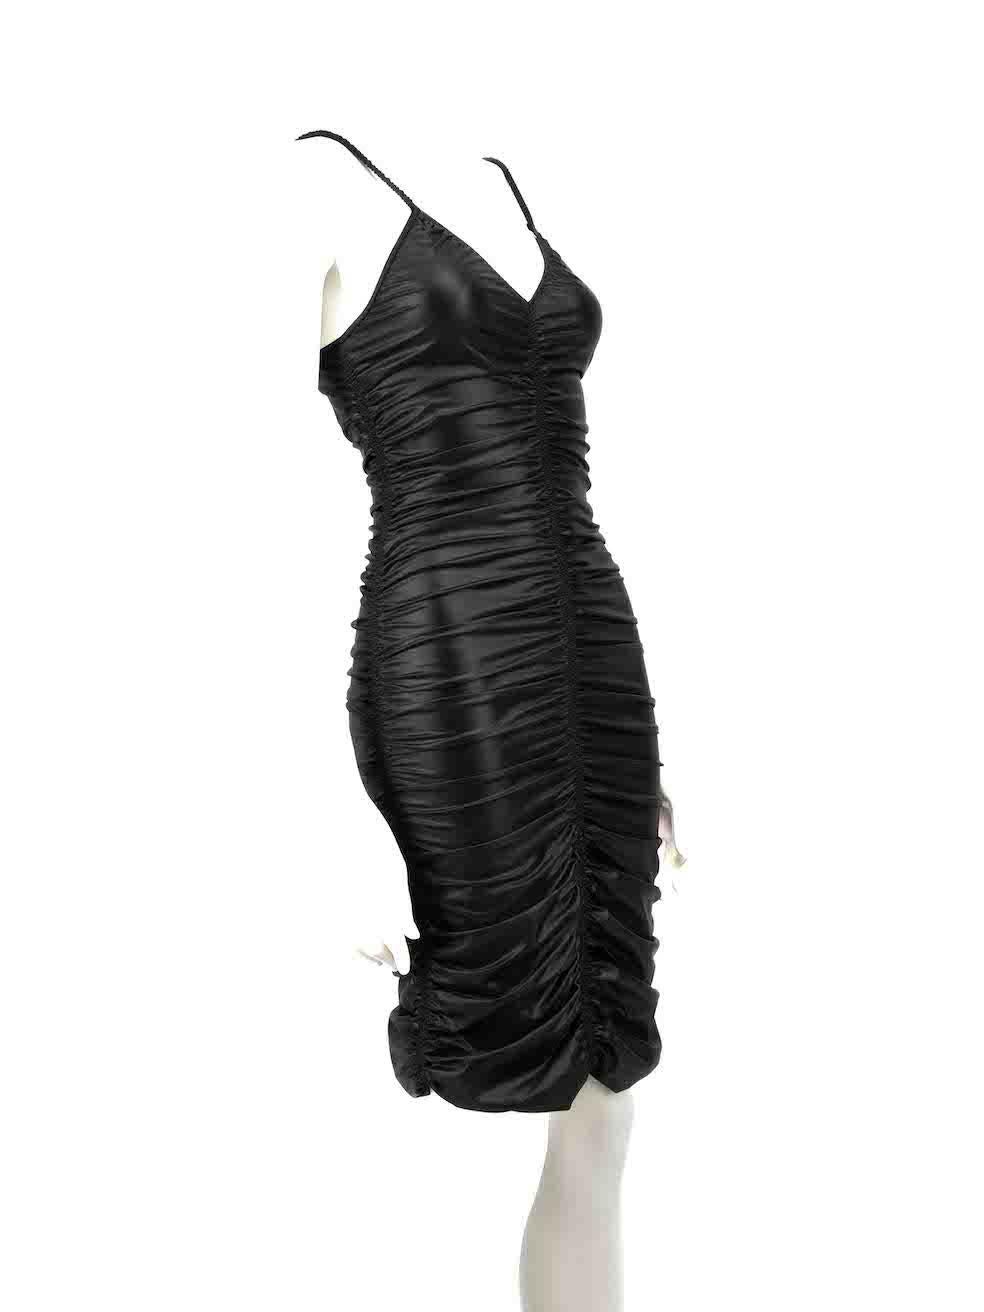 CONDITION is Very good. Hardly any visible wear to dress is evident on this used Alexander Wang designer resale item.
 
 
 
 Details
 
 
 Black
 
 Synthetic
 
 Mini bodycon dress
 
 Ruched accent
 
 Stretchy
 
 V neckline
 
 Side zip closure
 
 
 
